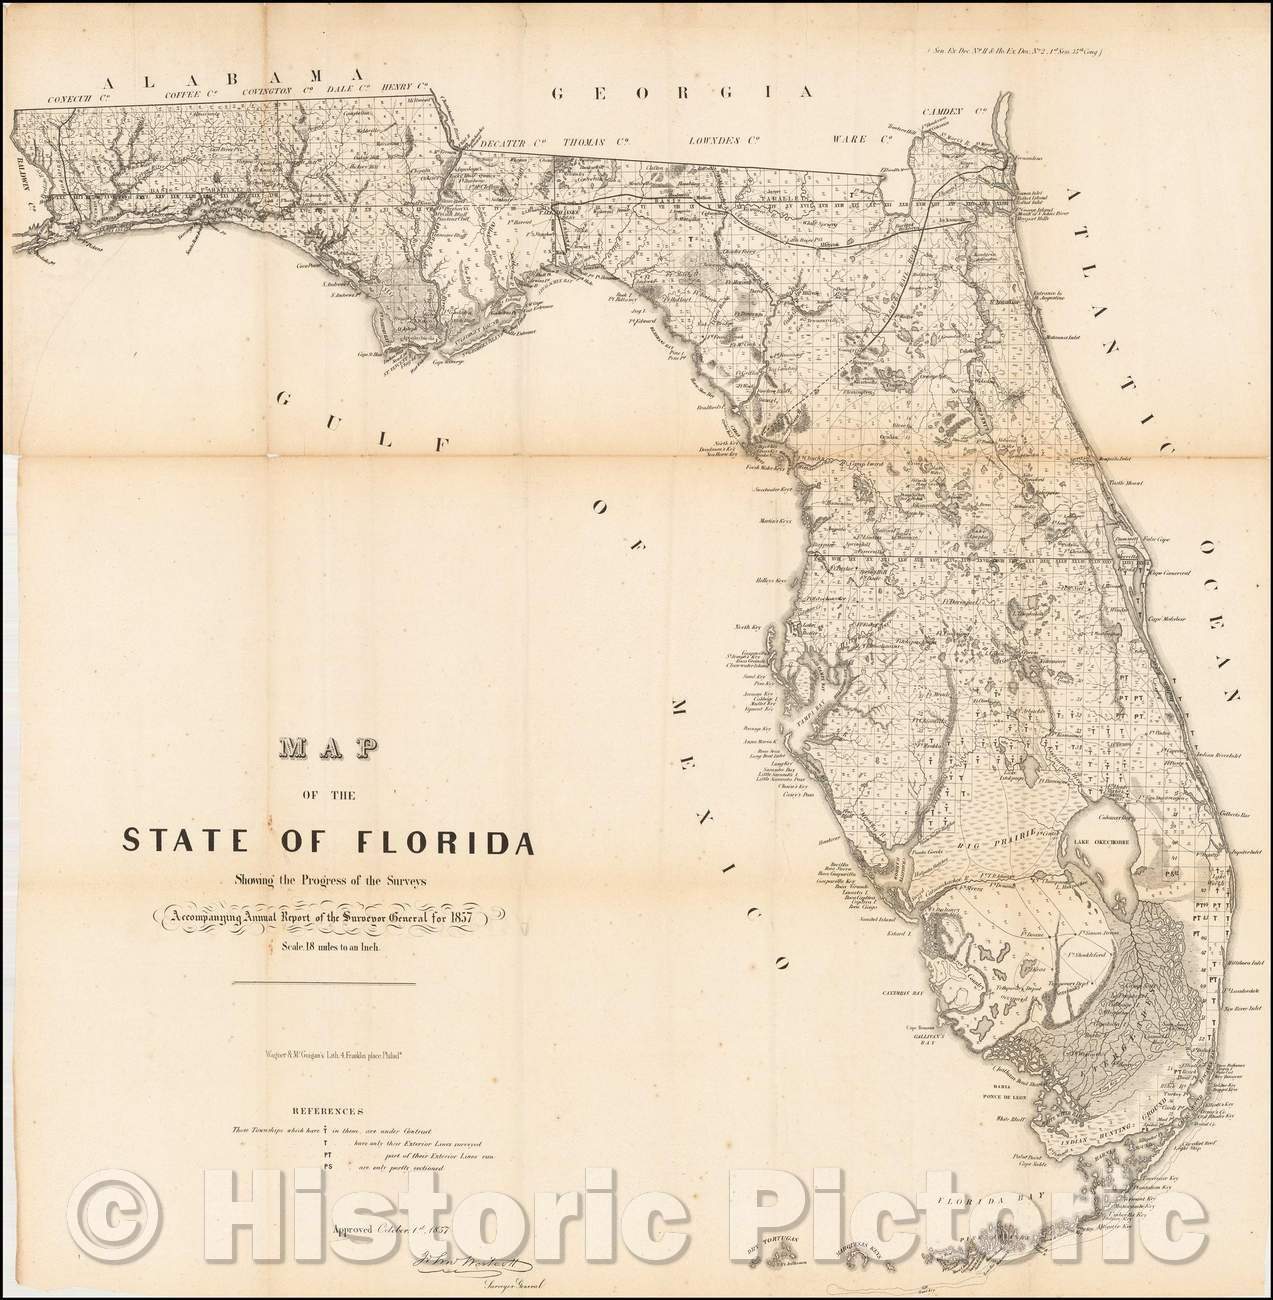 Historic Map - Map of the State of Florida Showing the Progress of the Surveys, 1857, U.S. General Land Office - Vintage Wall Art